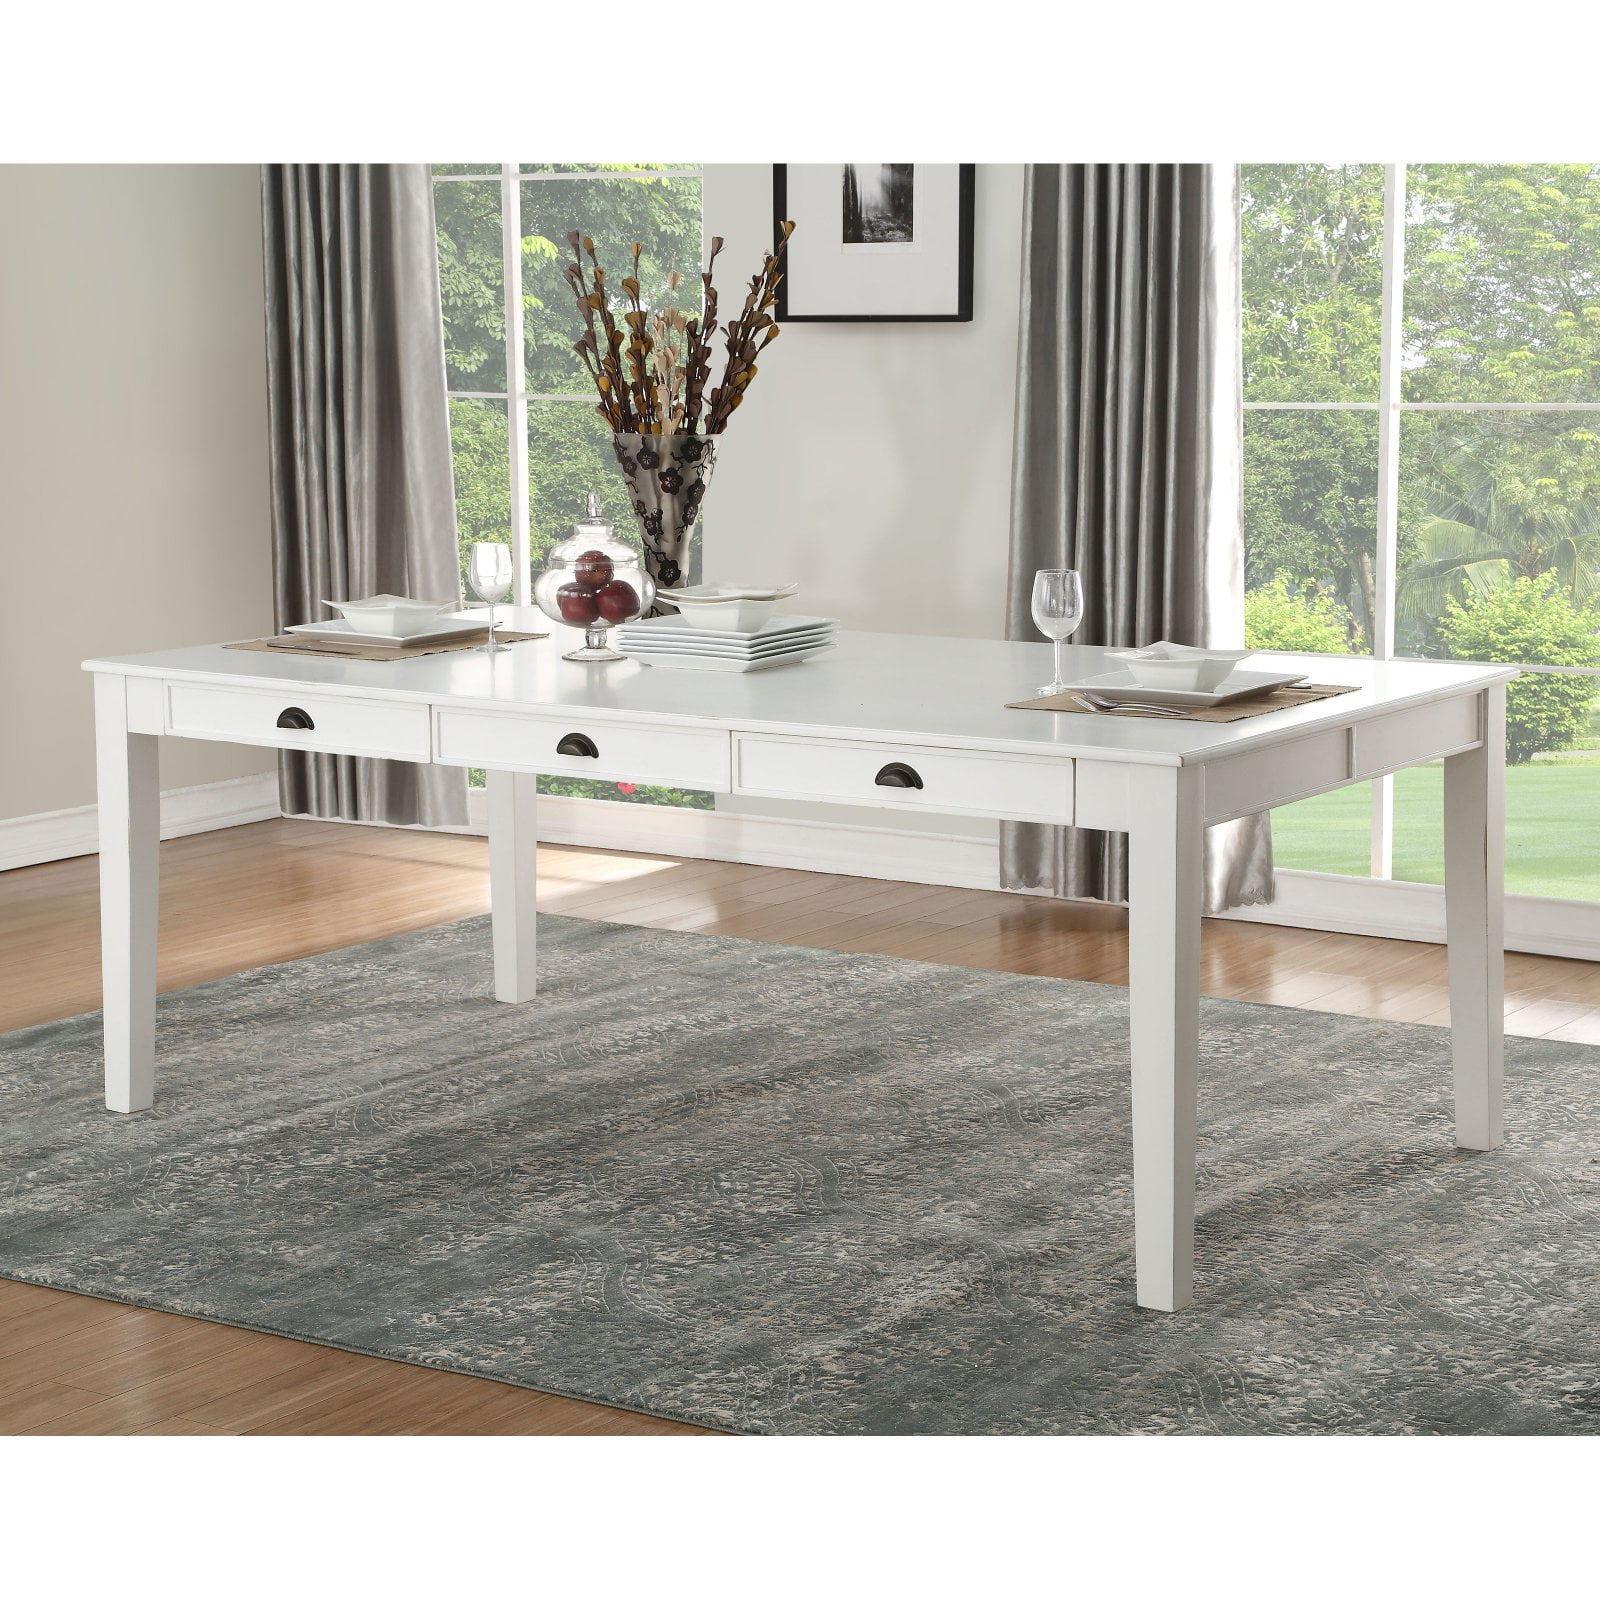 Picture of ACME 71850 Rectangular Renske Dining Table - Antique White